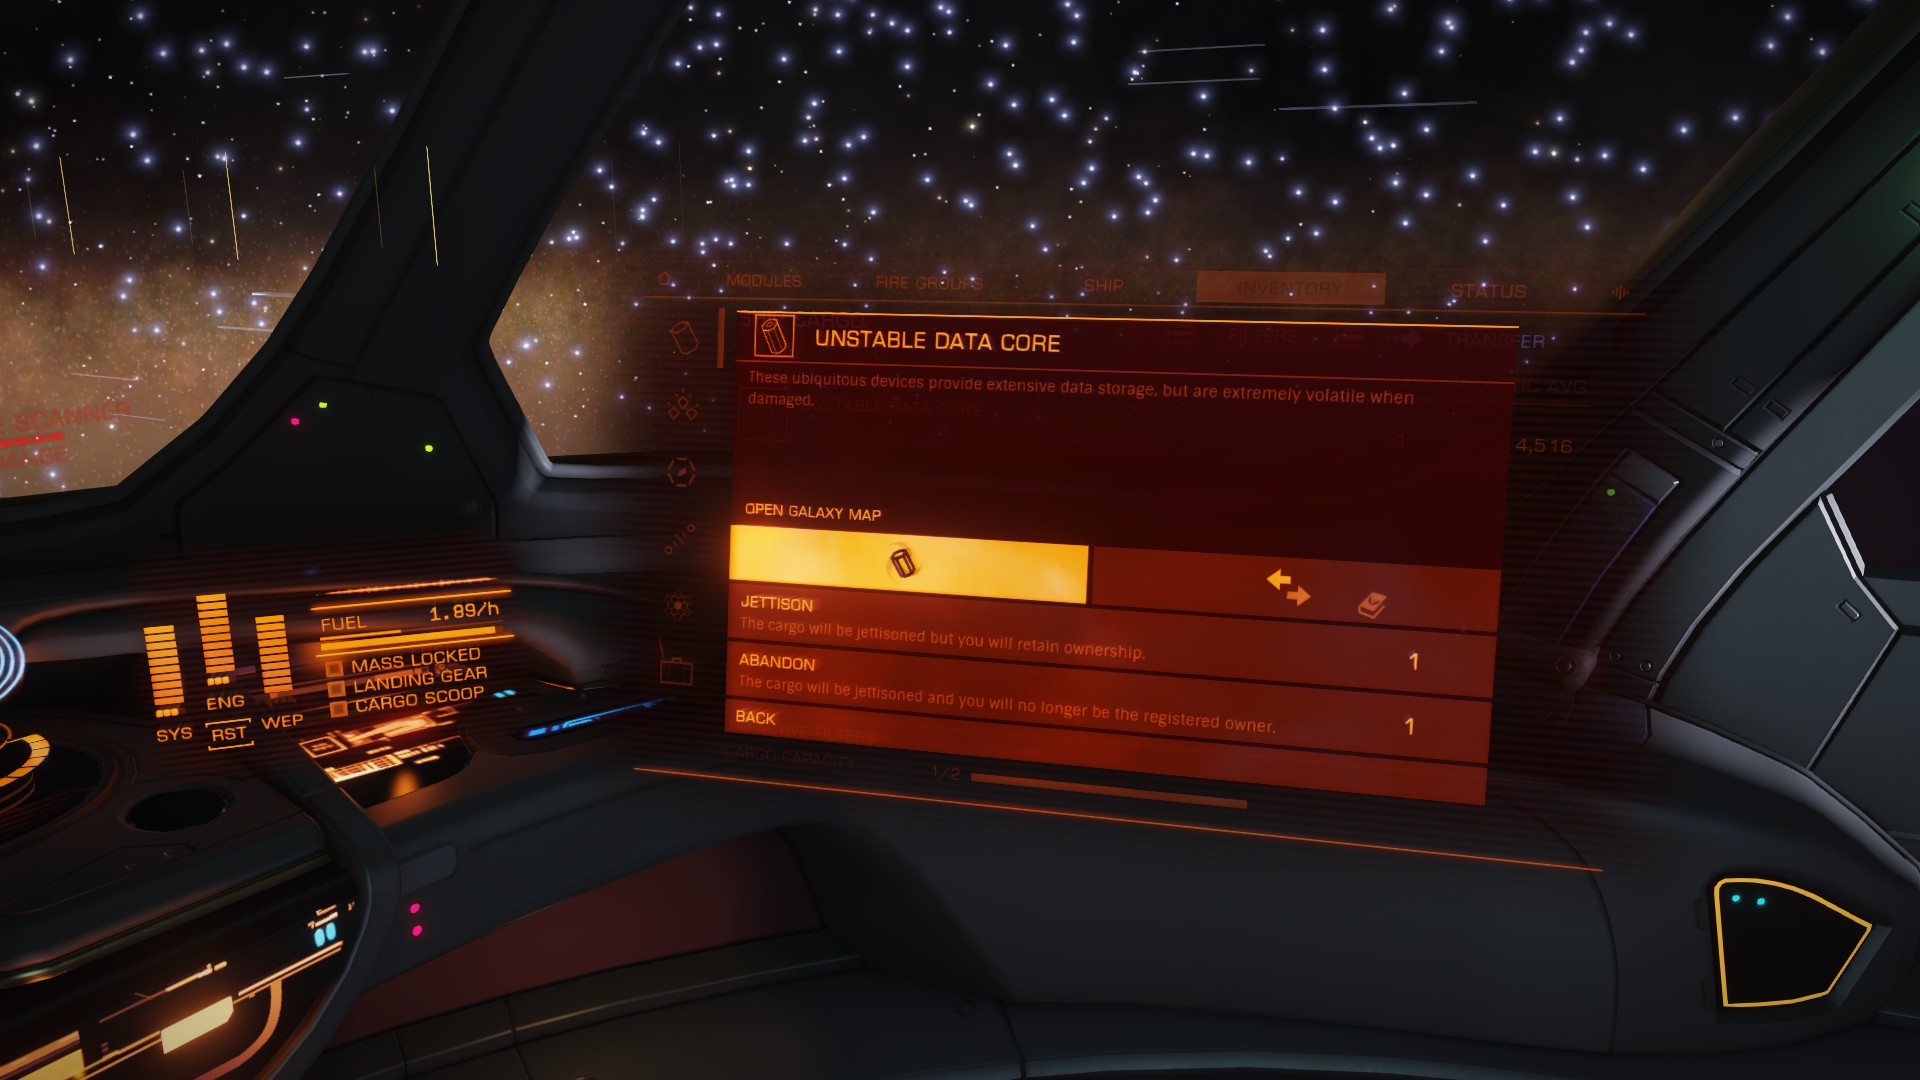 Unstable Data core in ship's cargo